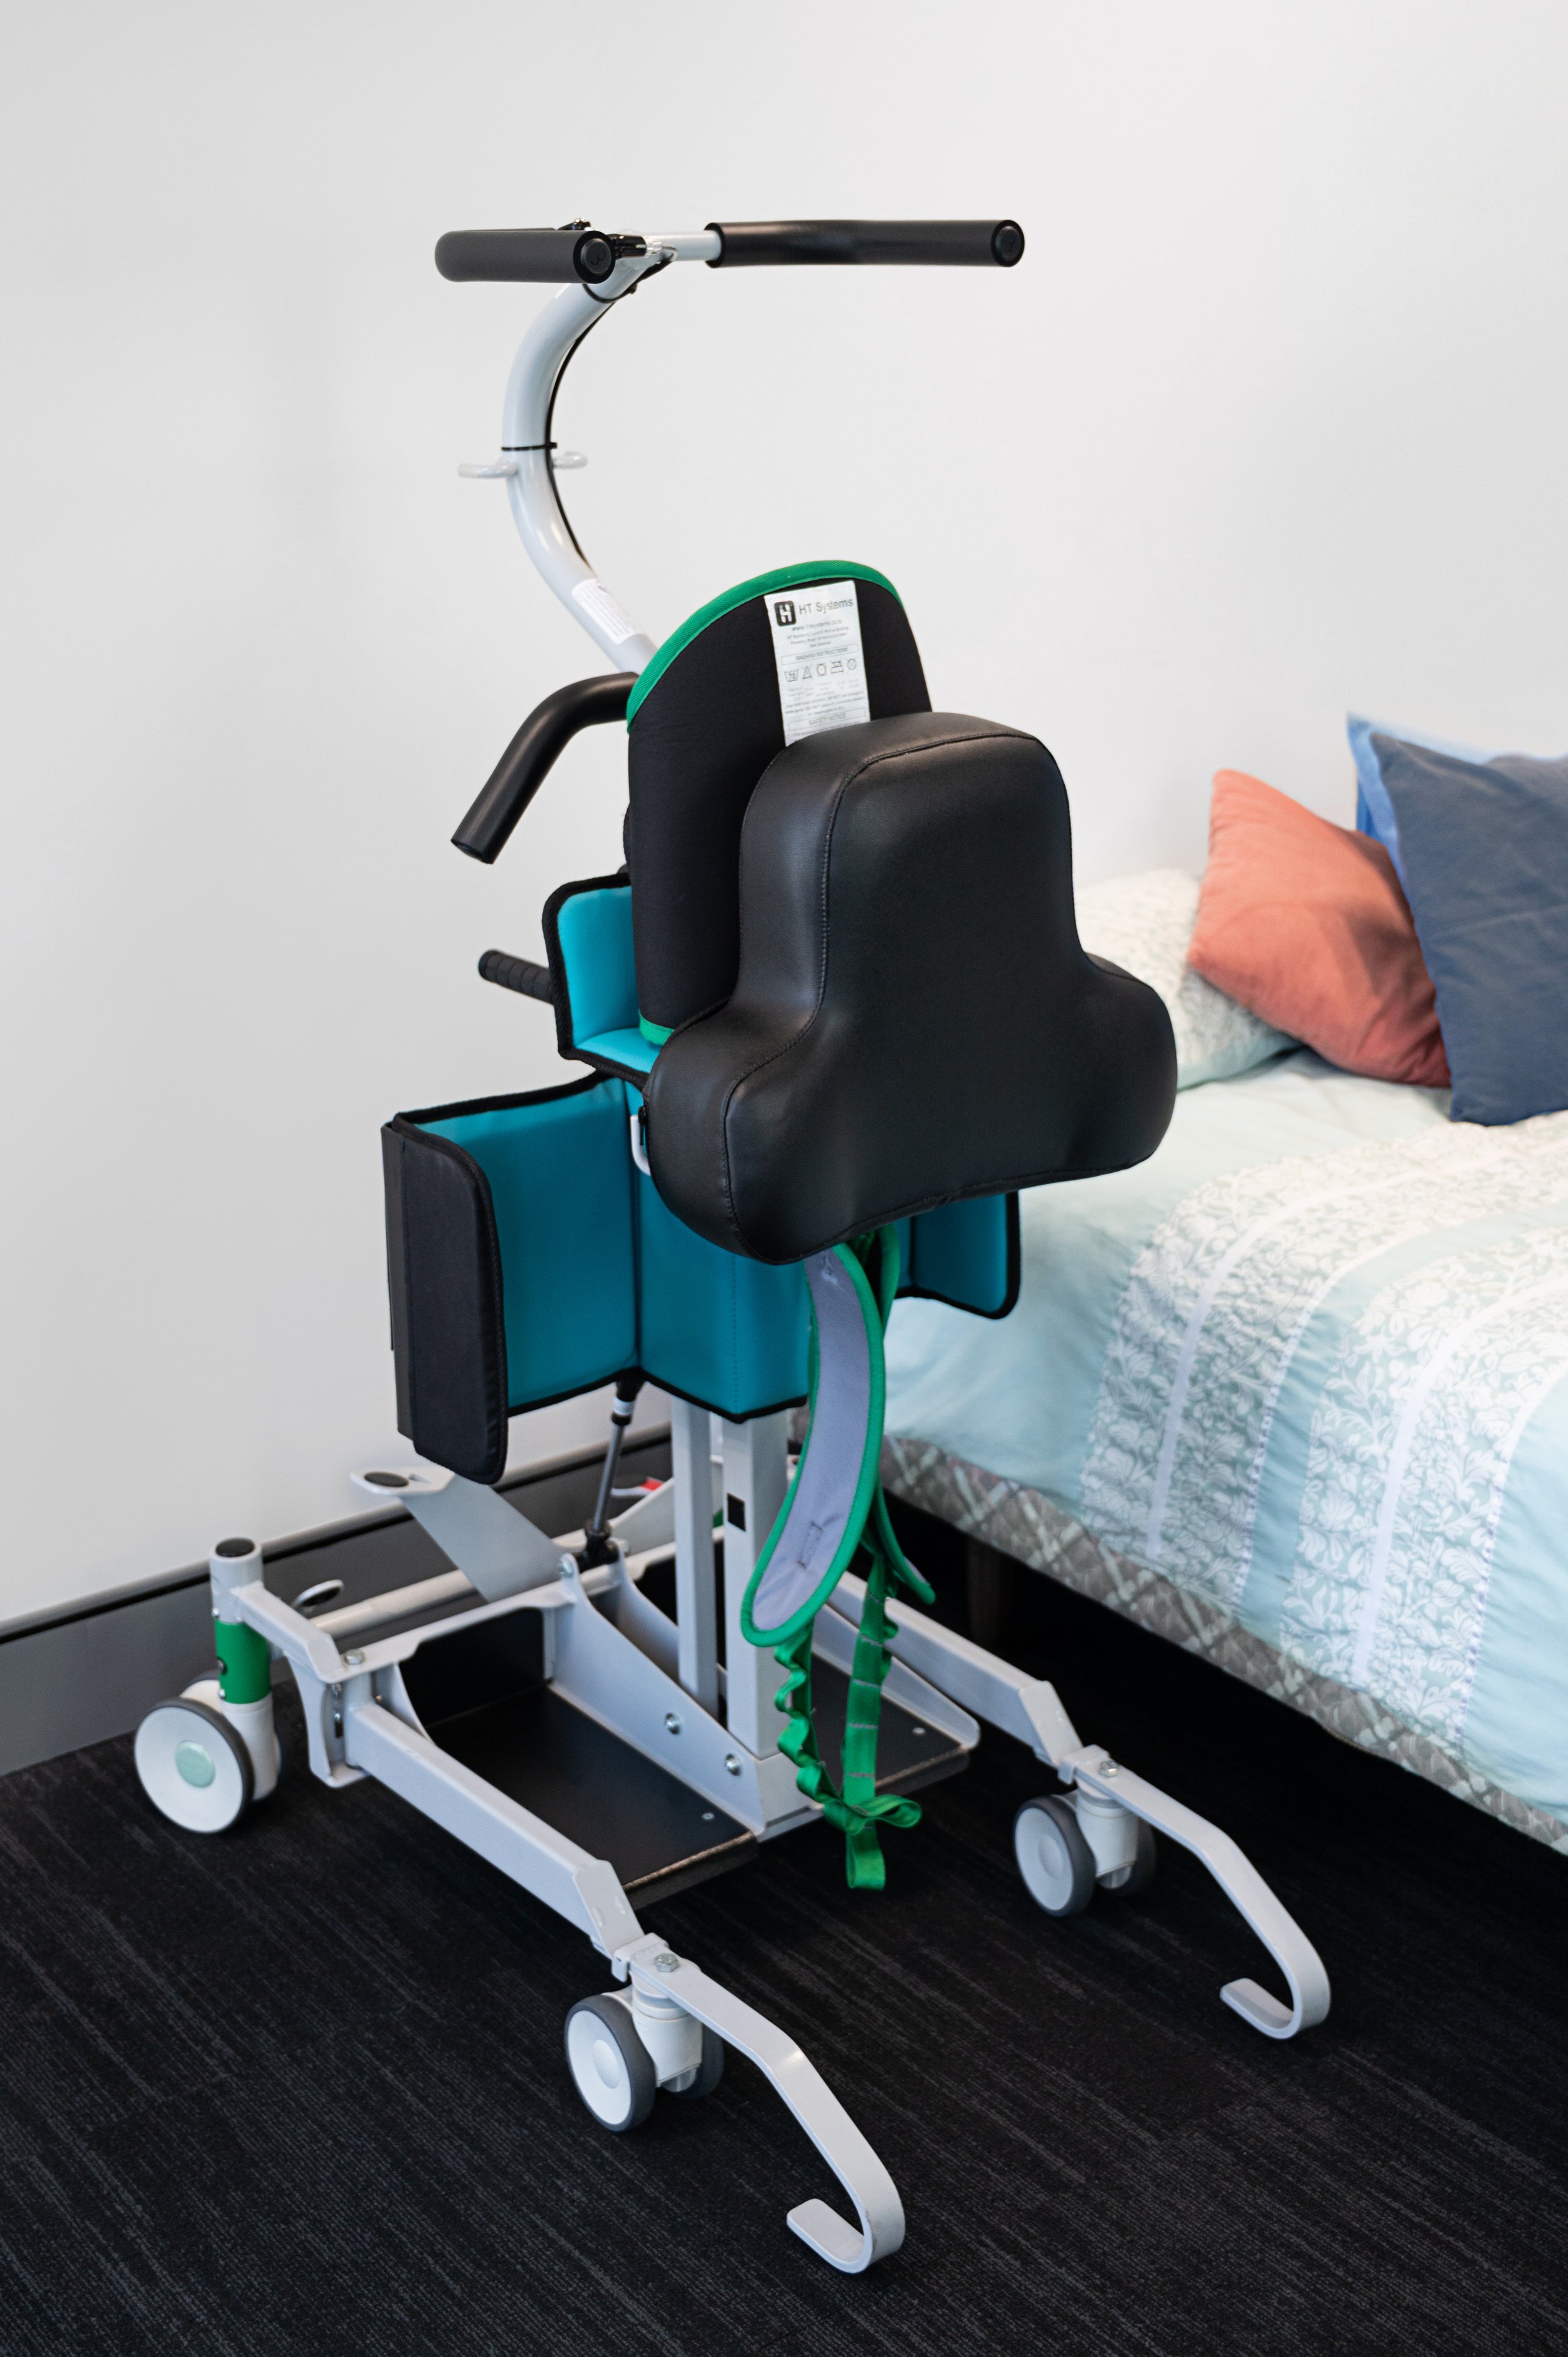 Kera sit2sit - The new way for a single caregiver to safely transfer a ...